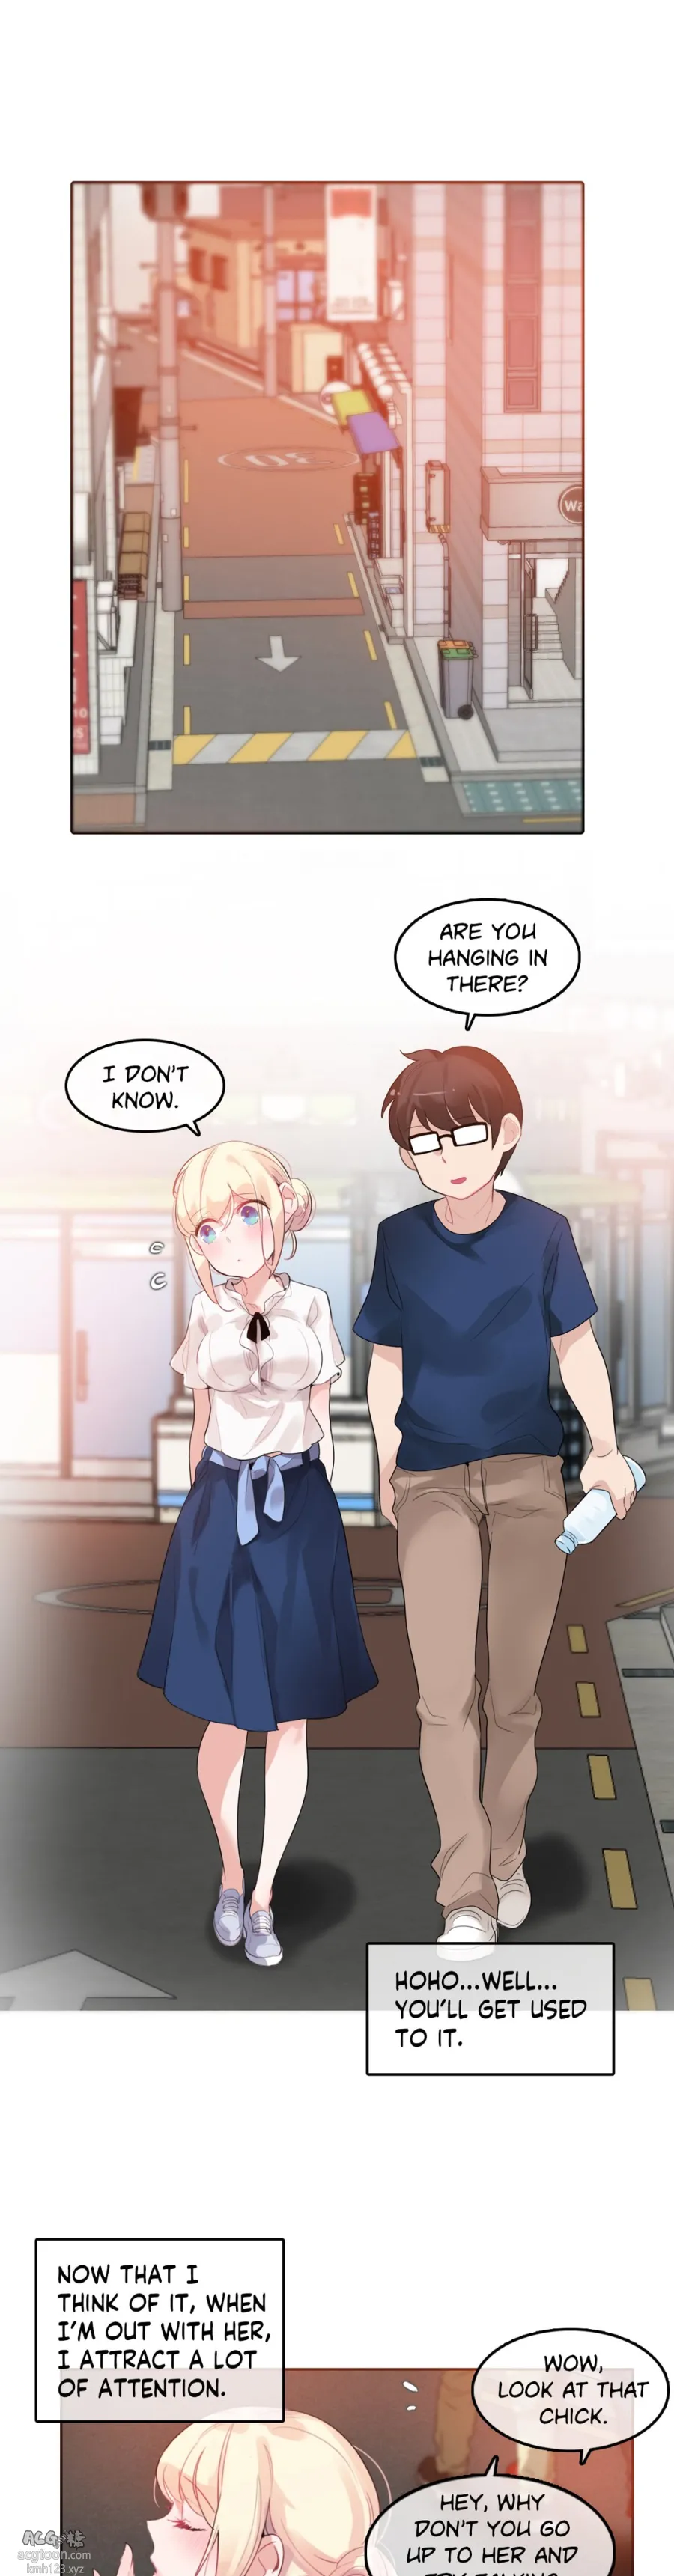 [Alice Crazy] A Pervert's Daily Life • Chapter 35-71 (English)